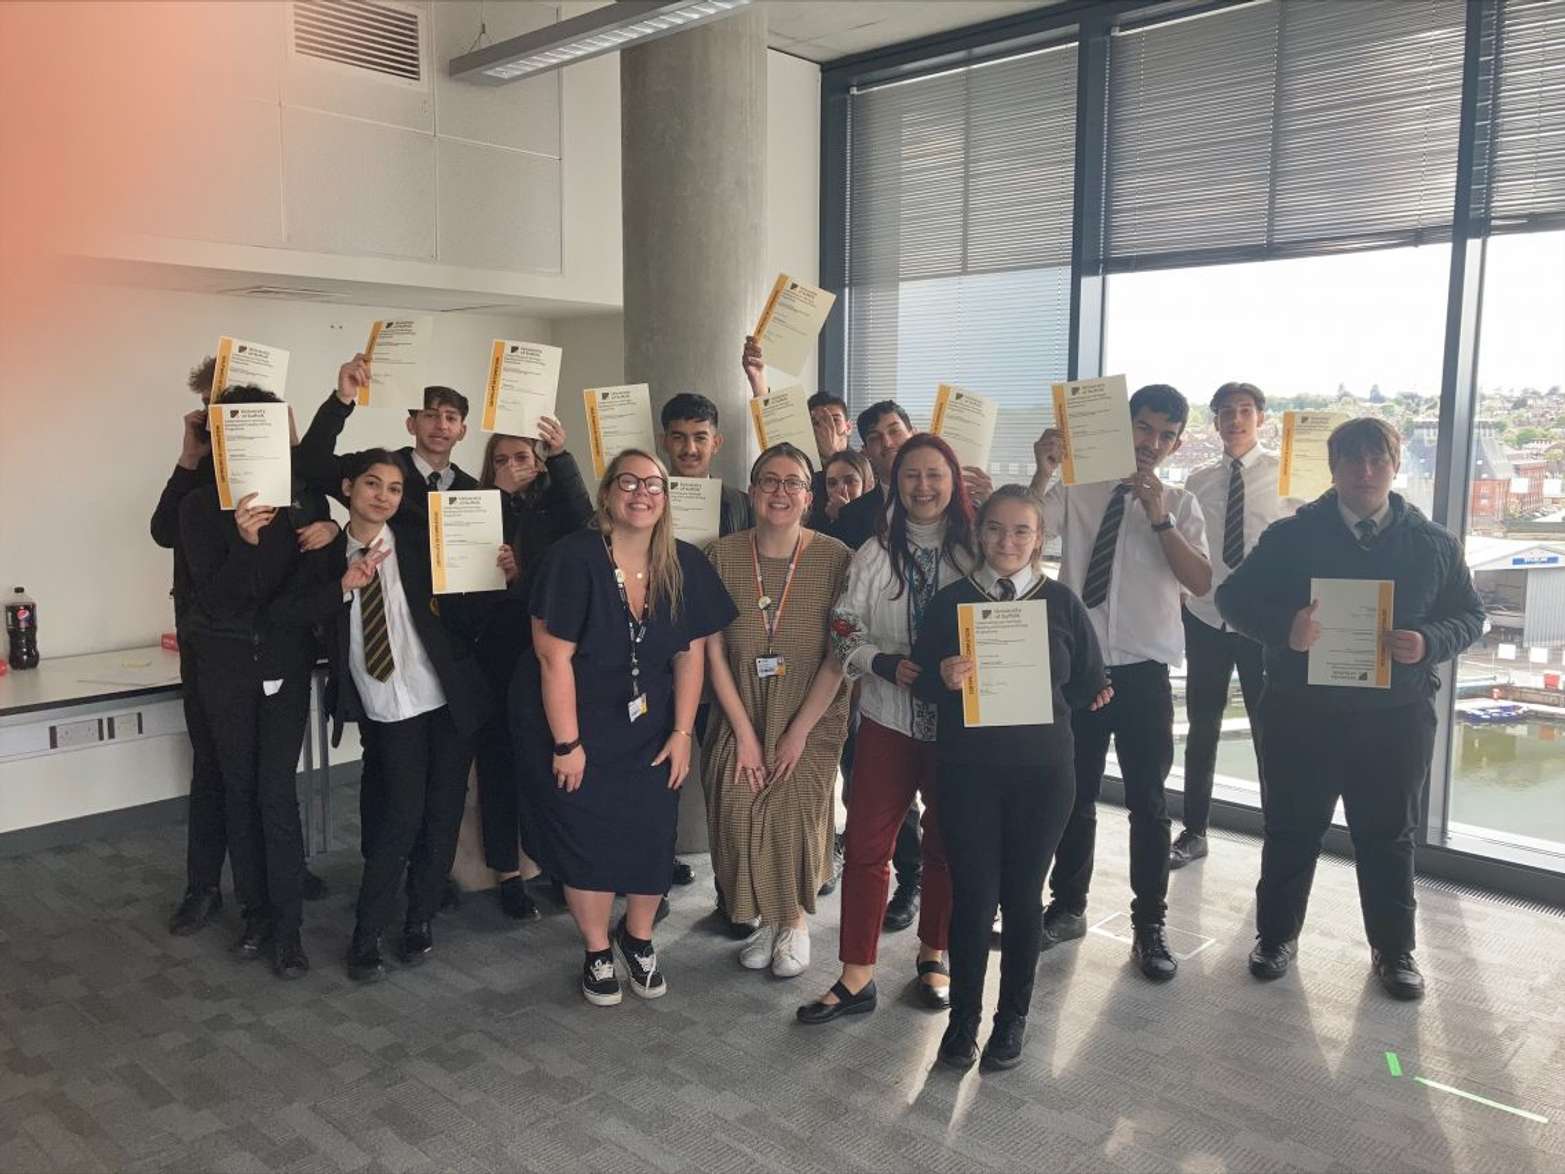 Roma students from Stoke High School with University of Suffolk staff at the Waterfront campus. They are smiling and holding certificates.